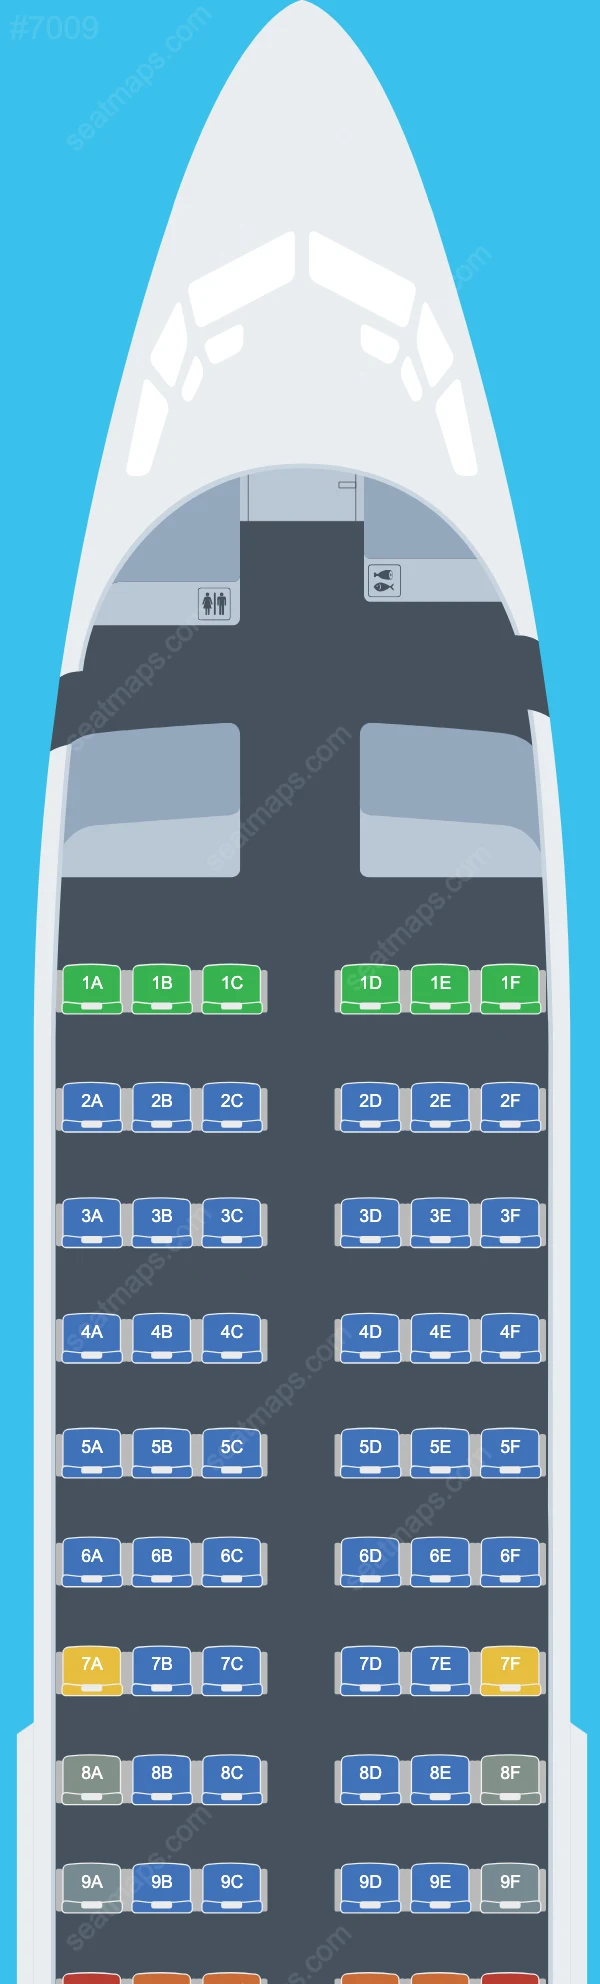 Lucky Air Boeing 737 Seat Maps 737-700 V.1